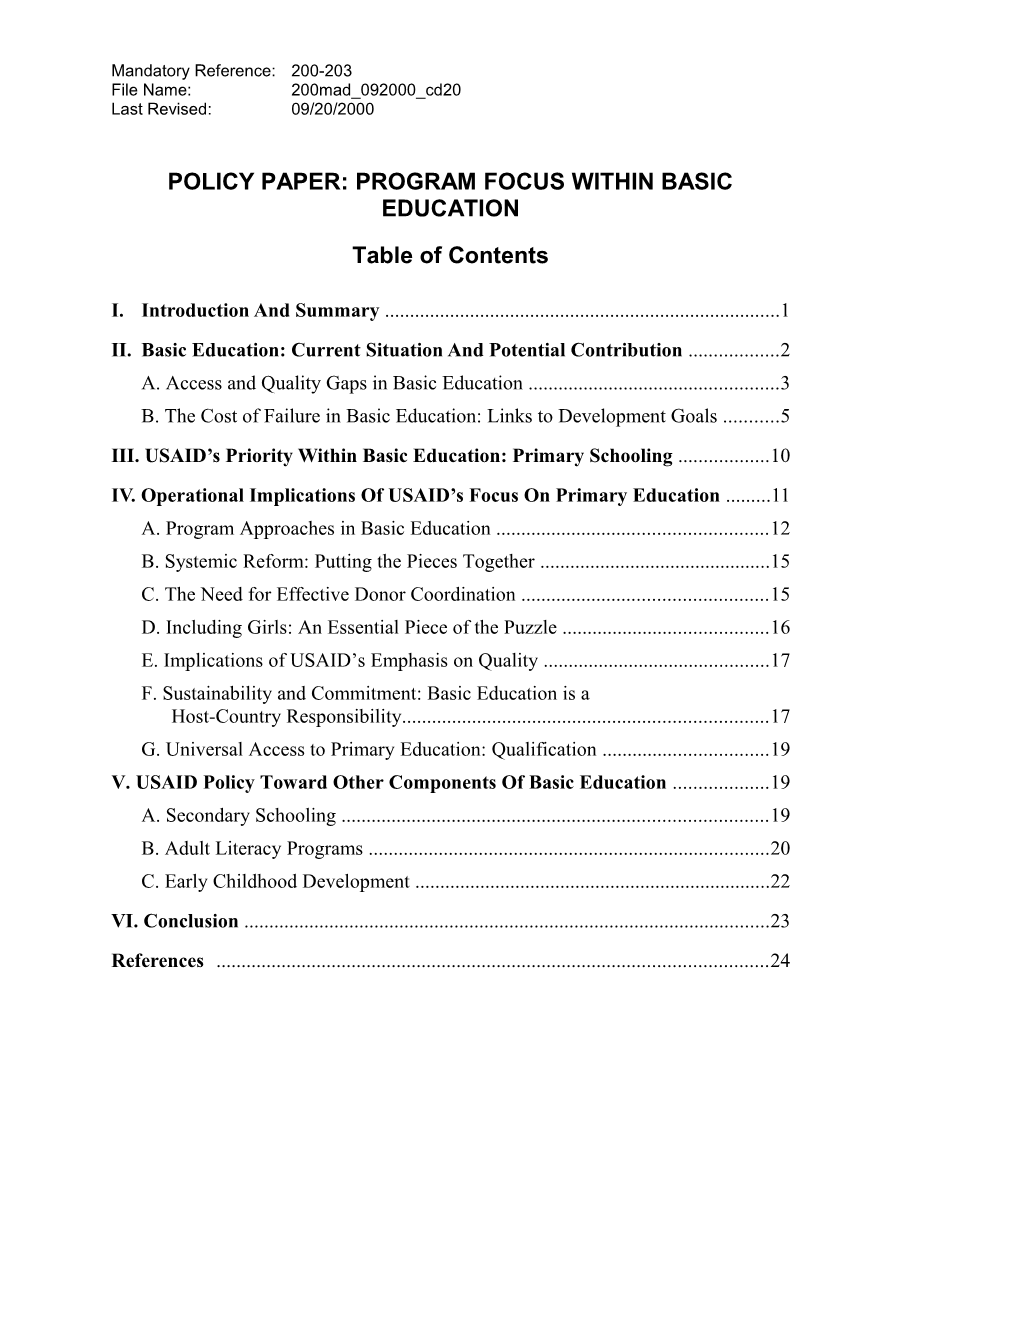 Policy Paper: Program Focus Within Basic Education